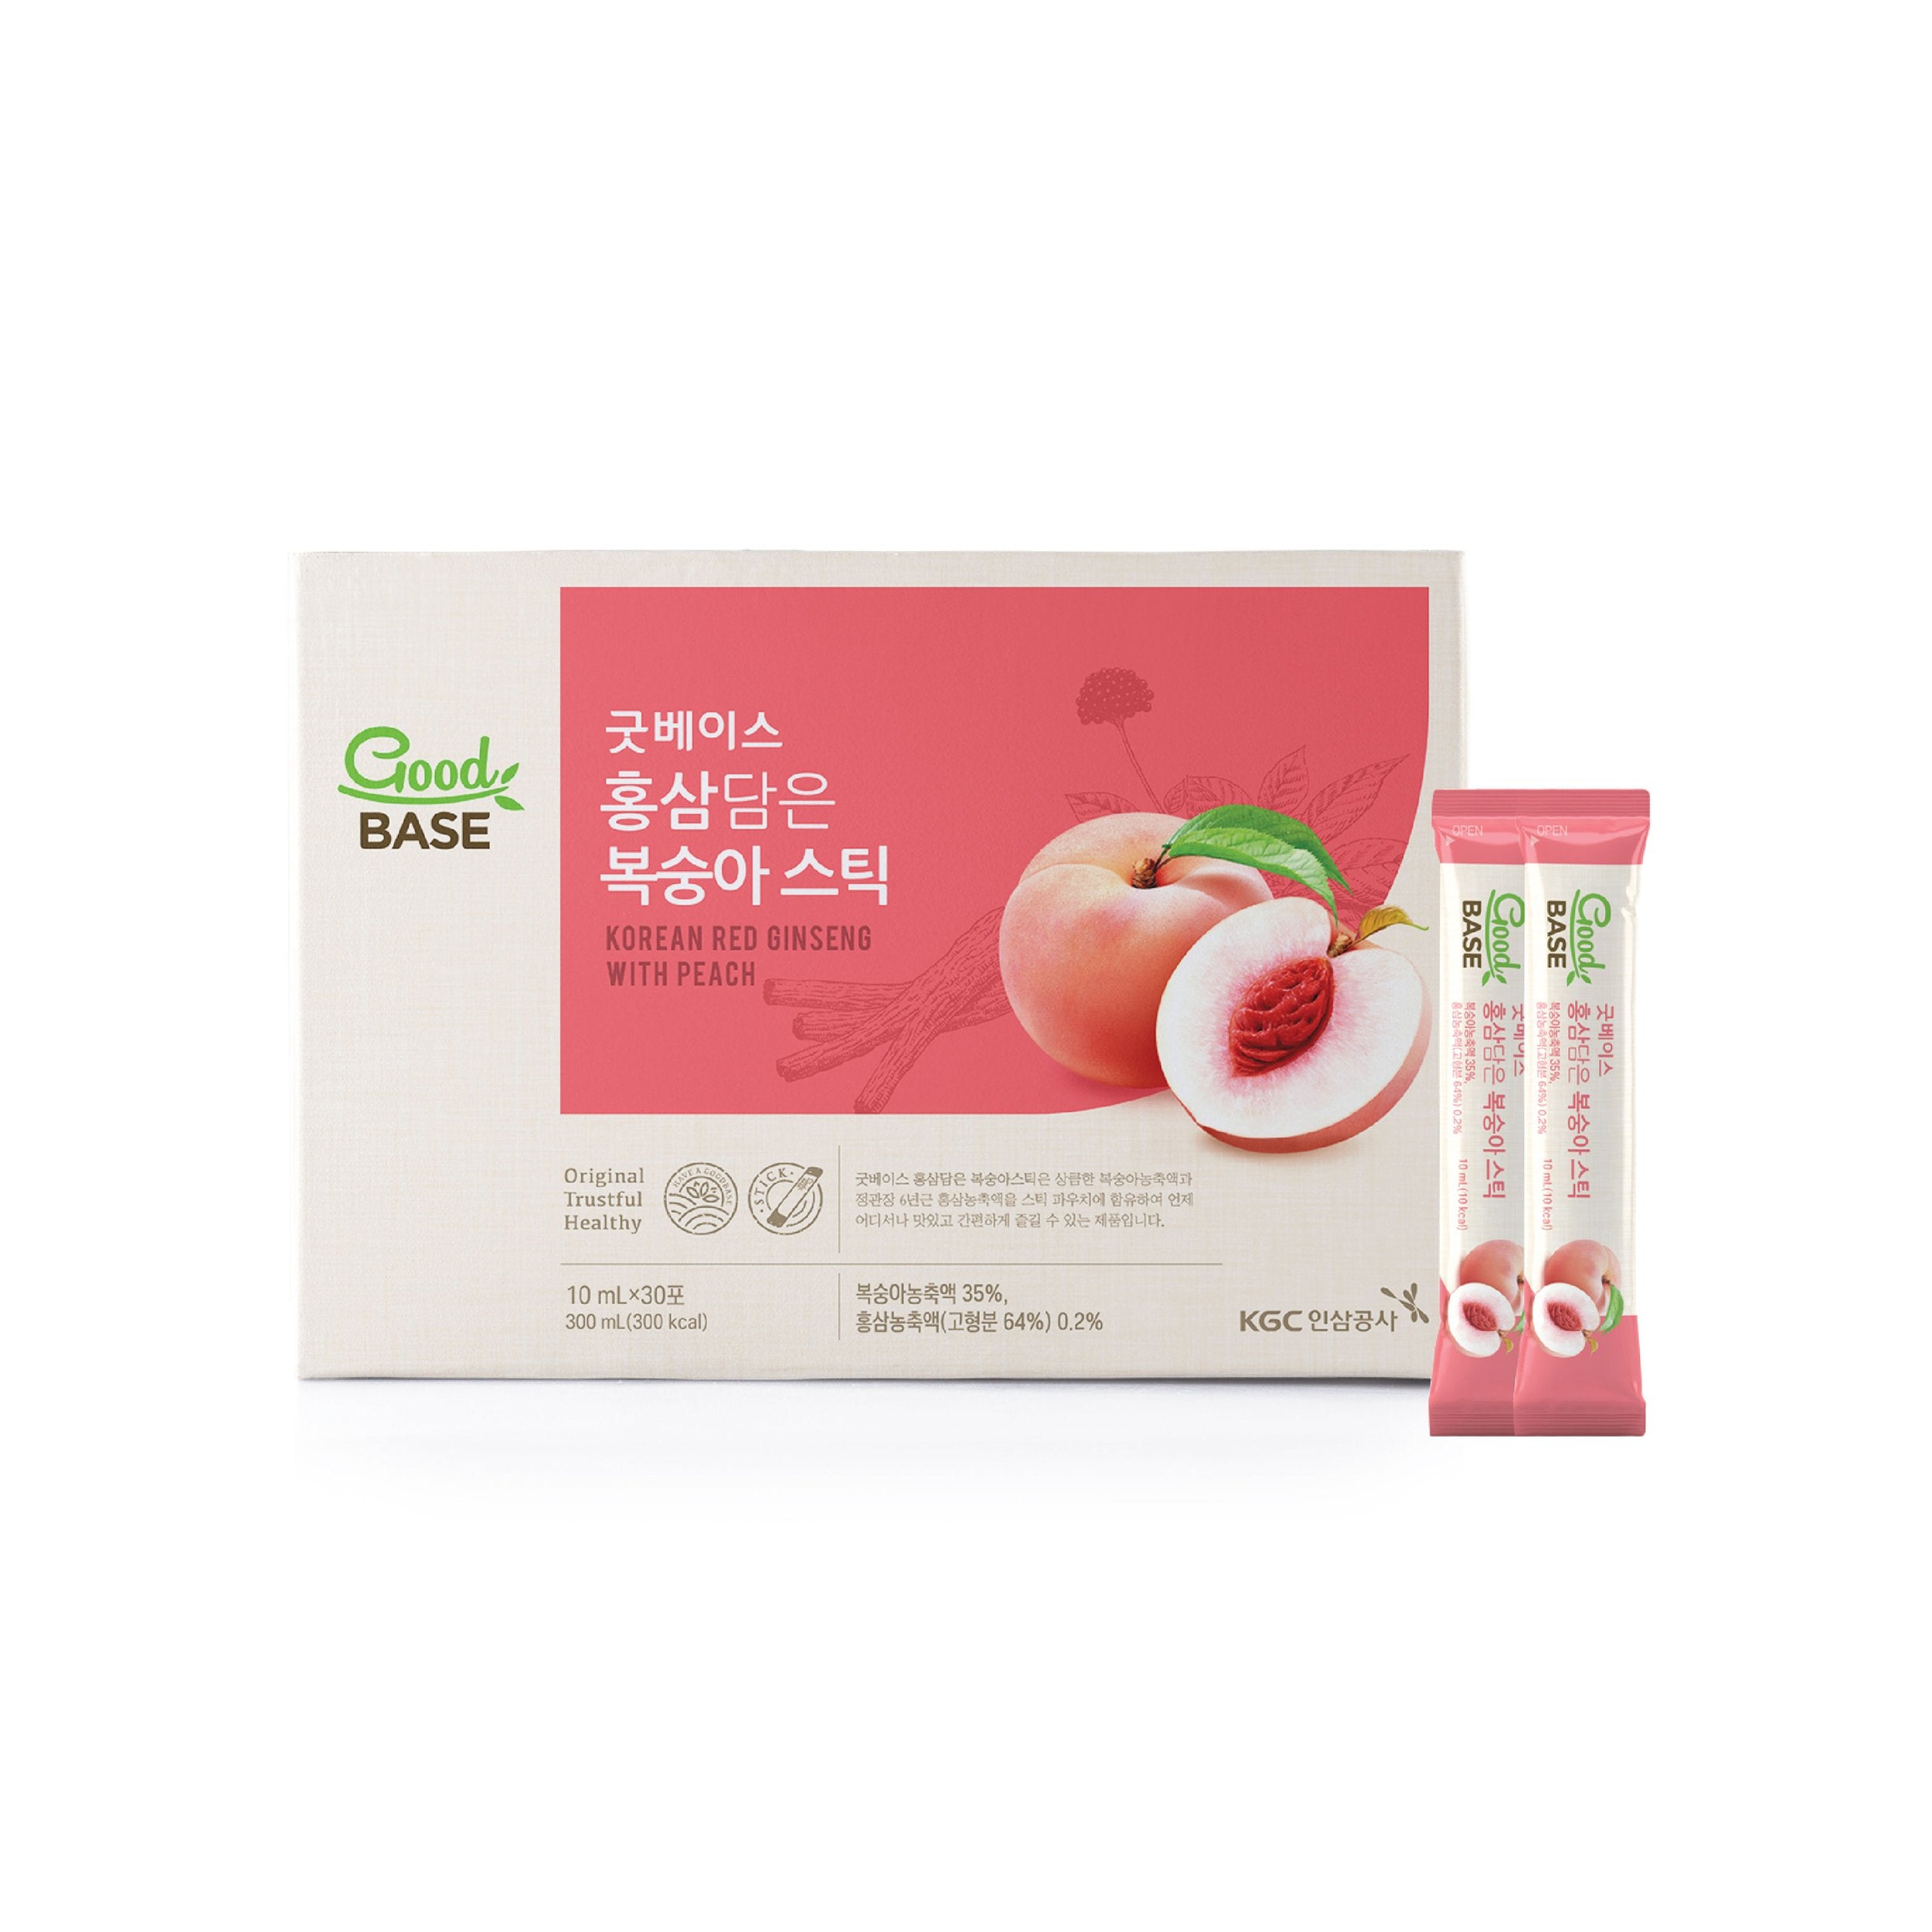 GoodBase Peach Sticks: Ginseng Drink On-The-Go